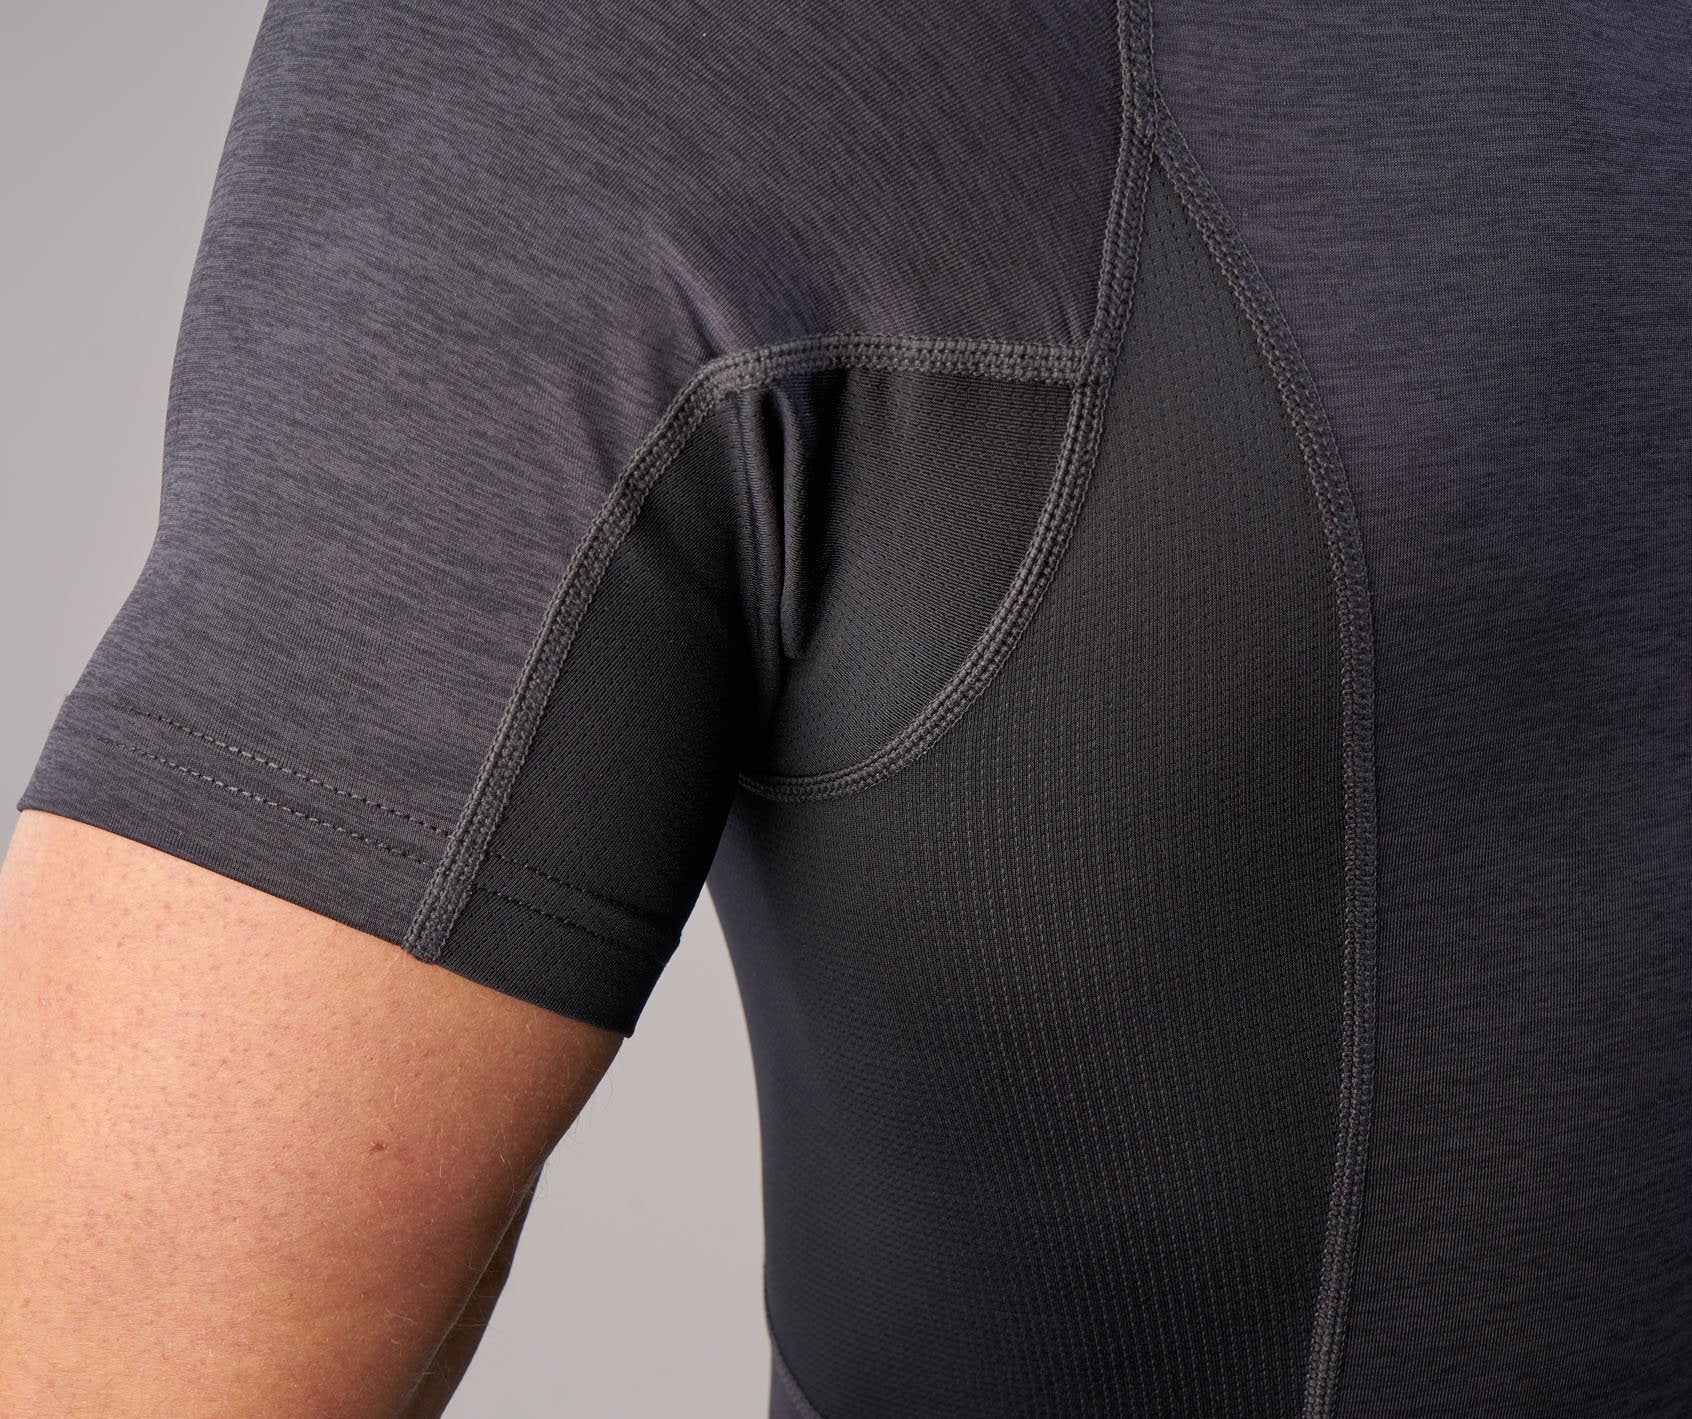 Element Baselayer Short Sleeve Top in Black Marl - view 6